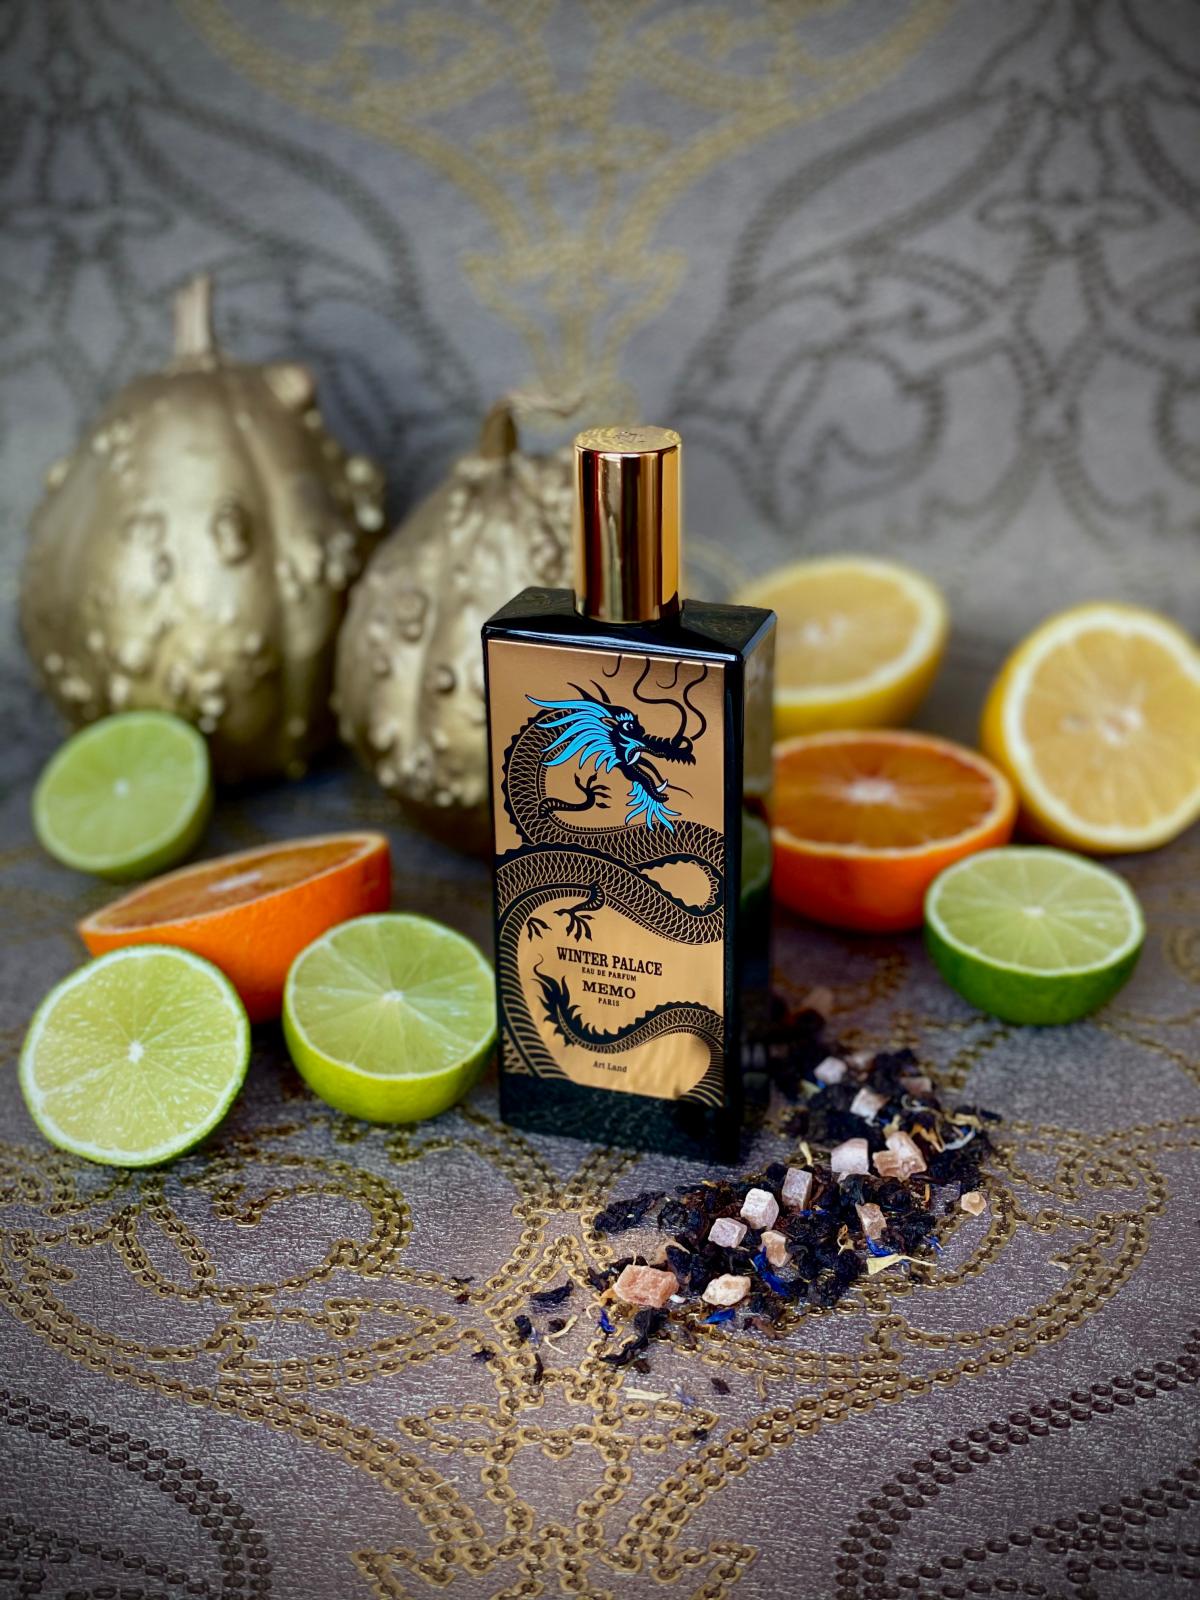 Winter Palace Memo Paris perfume - a new fragrance for ...